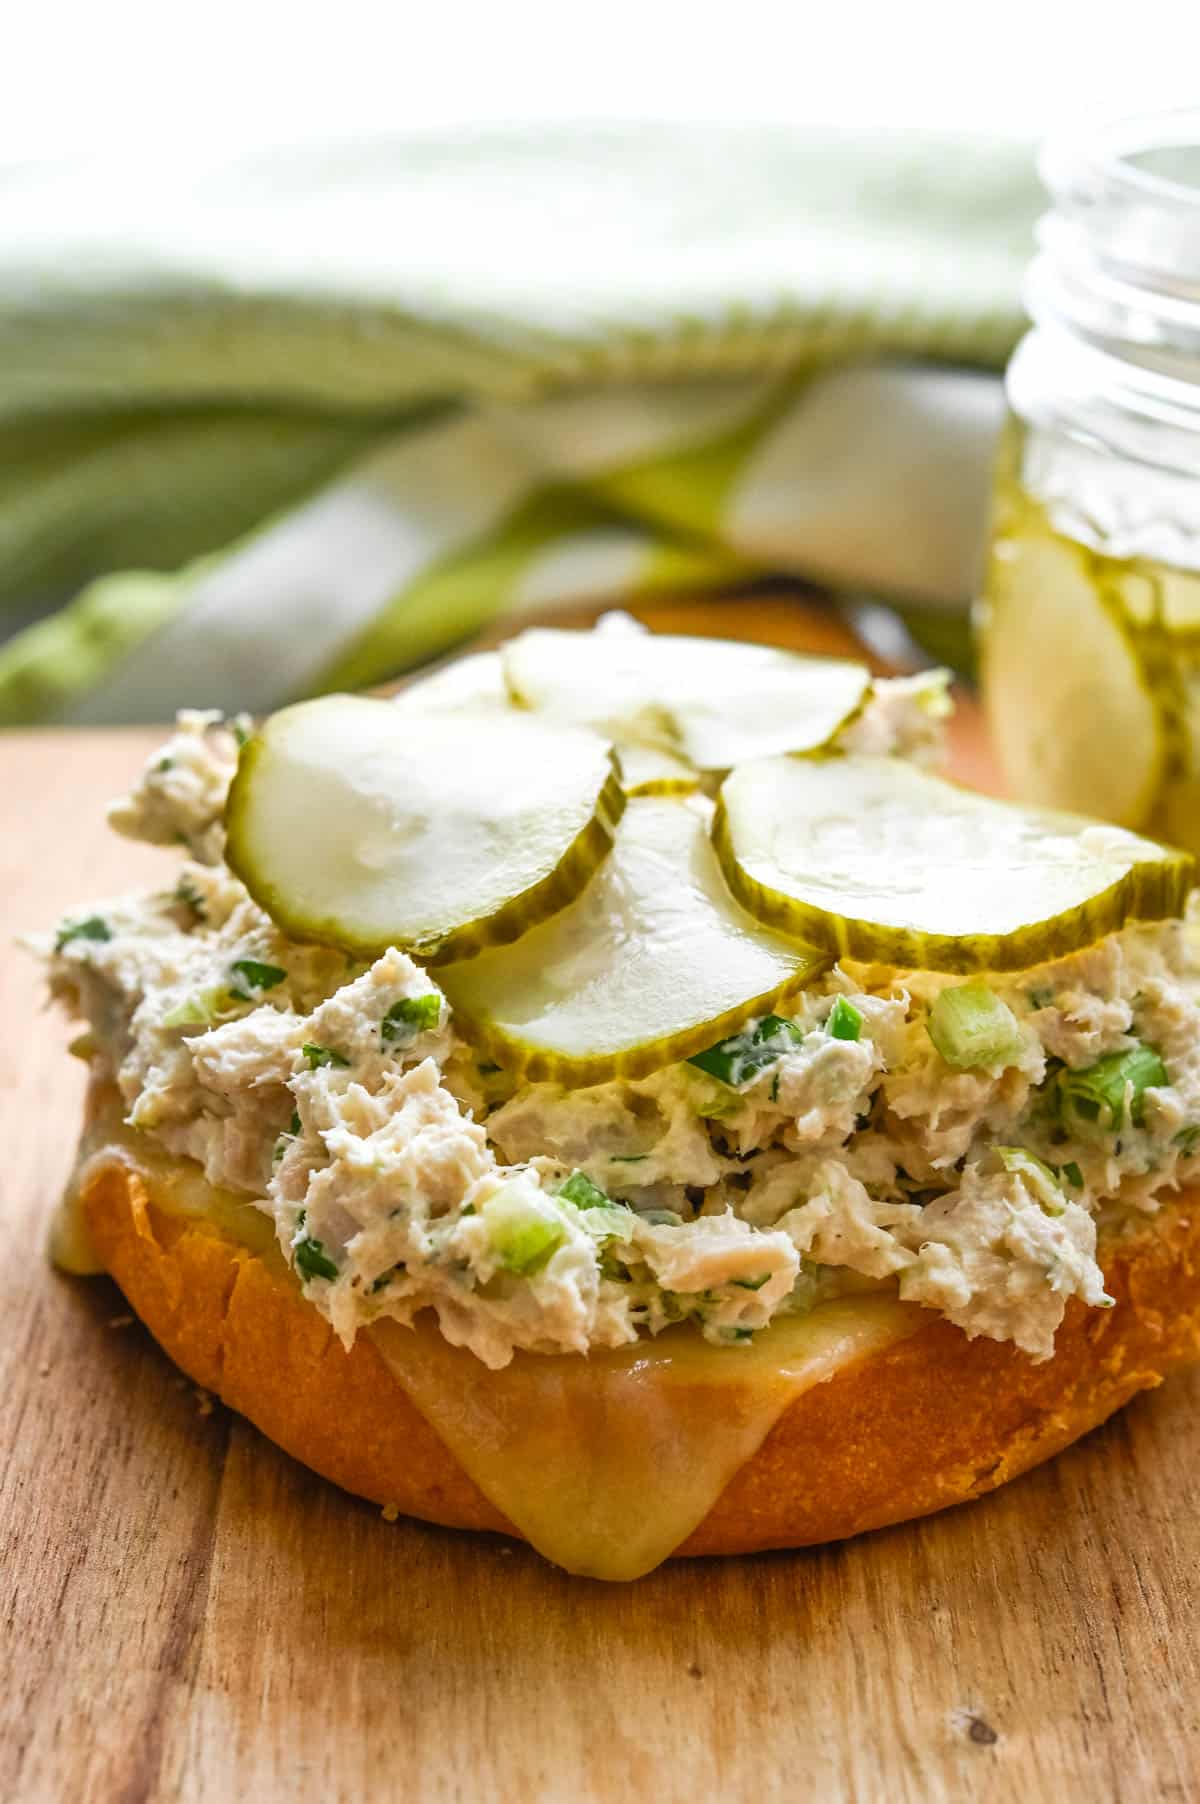 Pile the bottom bun with pepper jack cheese, tuna salad and pickles.